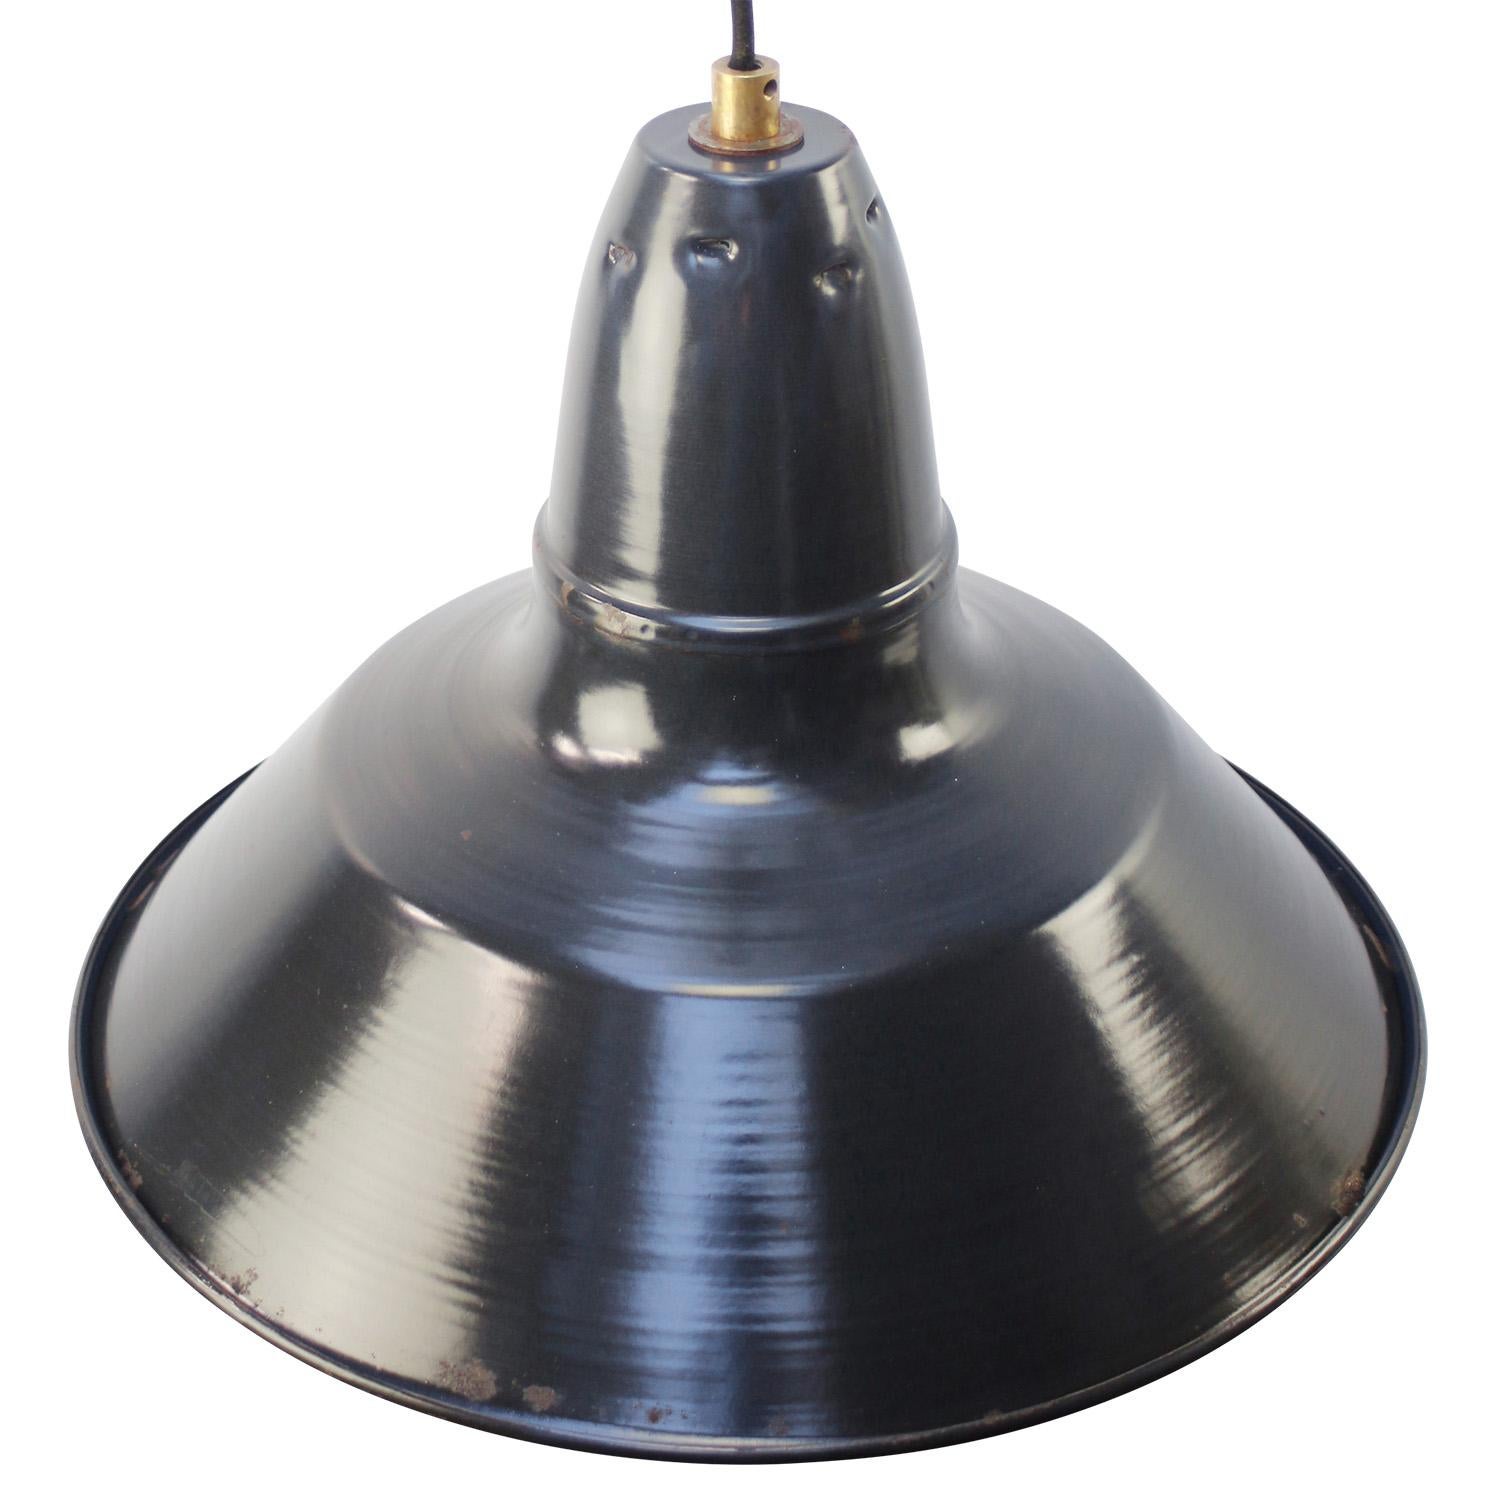 French black / blue Industrial pendant lamp.
Used in warehouses and factories in France and Belgium. 

Weight: 1.80 kg / 4 lb

Priced per individual item. All lamps have been made suitable by international standards for incandescent light bulbs,